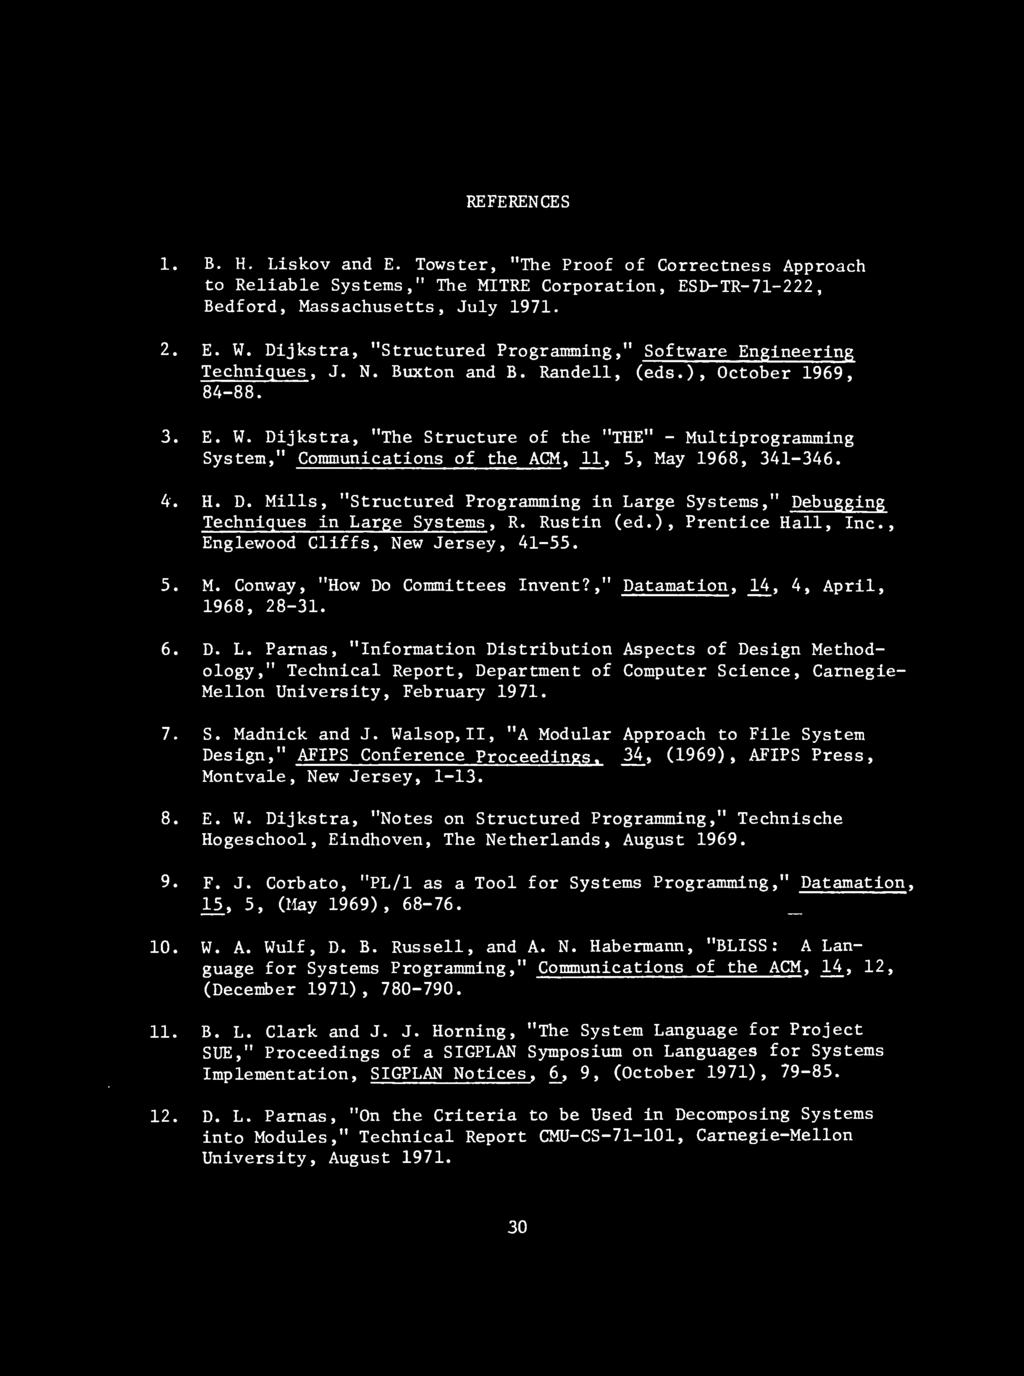 Dijkstra, "The Structure of the "THE" - Multiprogramming System," Communications of the ACM, 11, 5, May 1968, 341-346. 4. H. D.